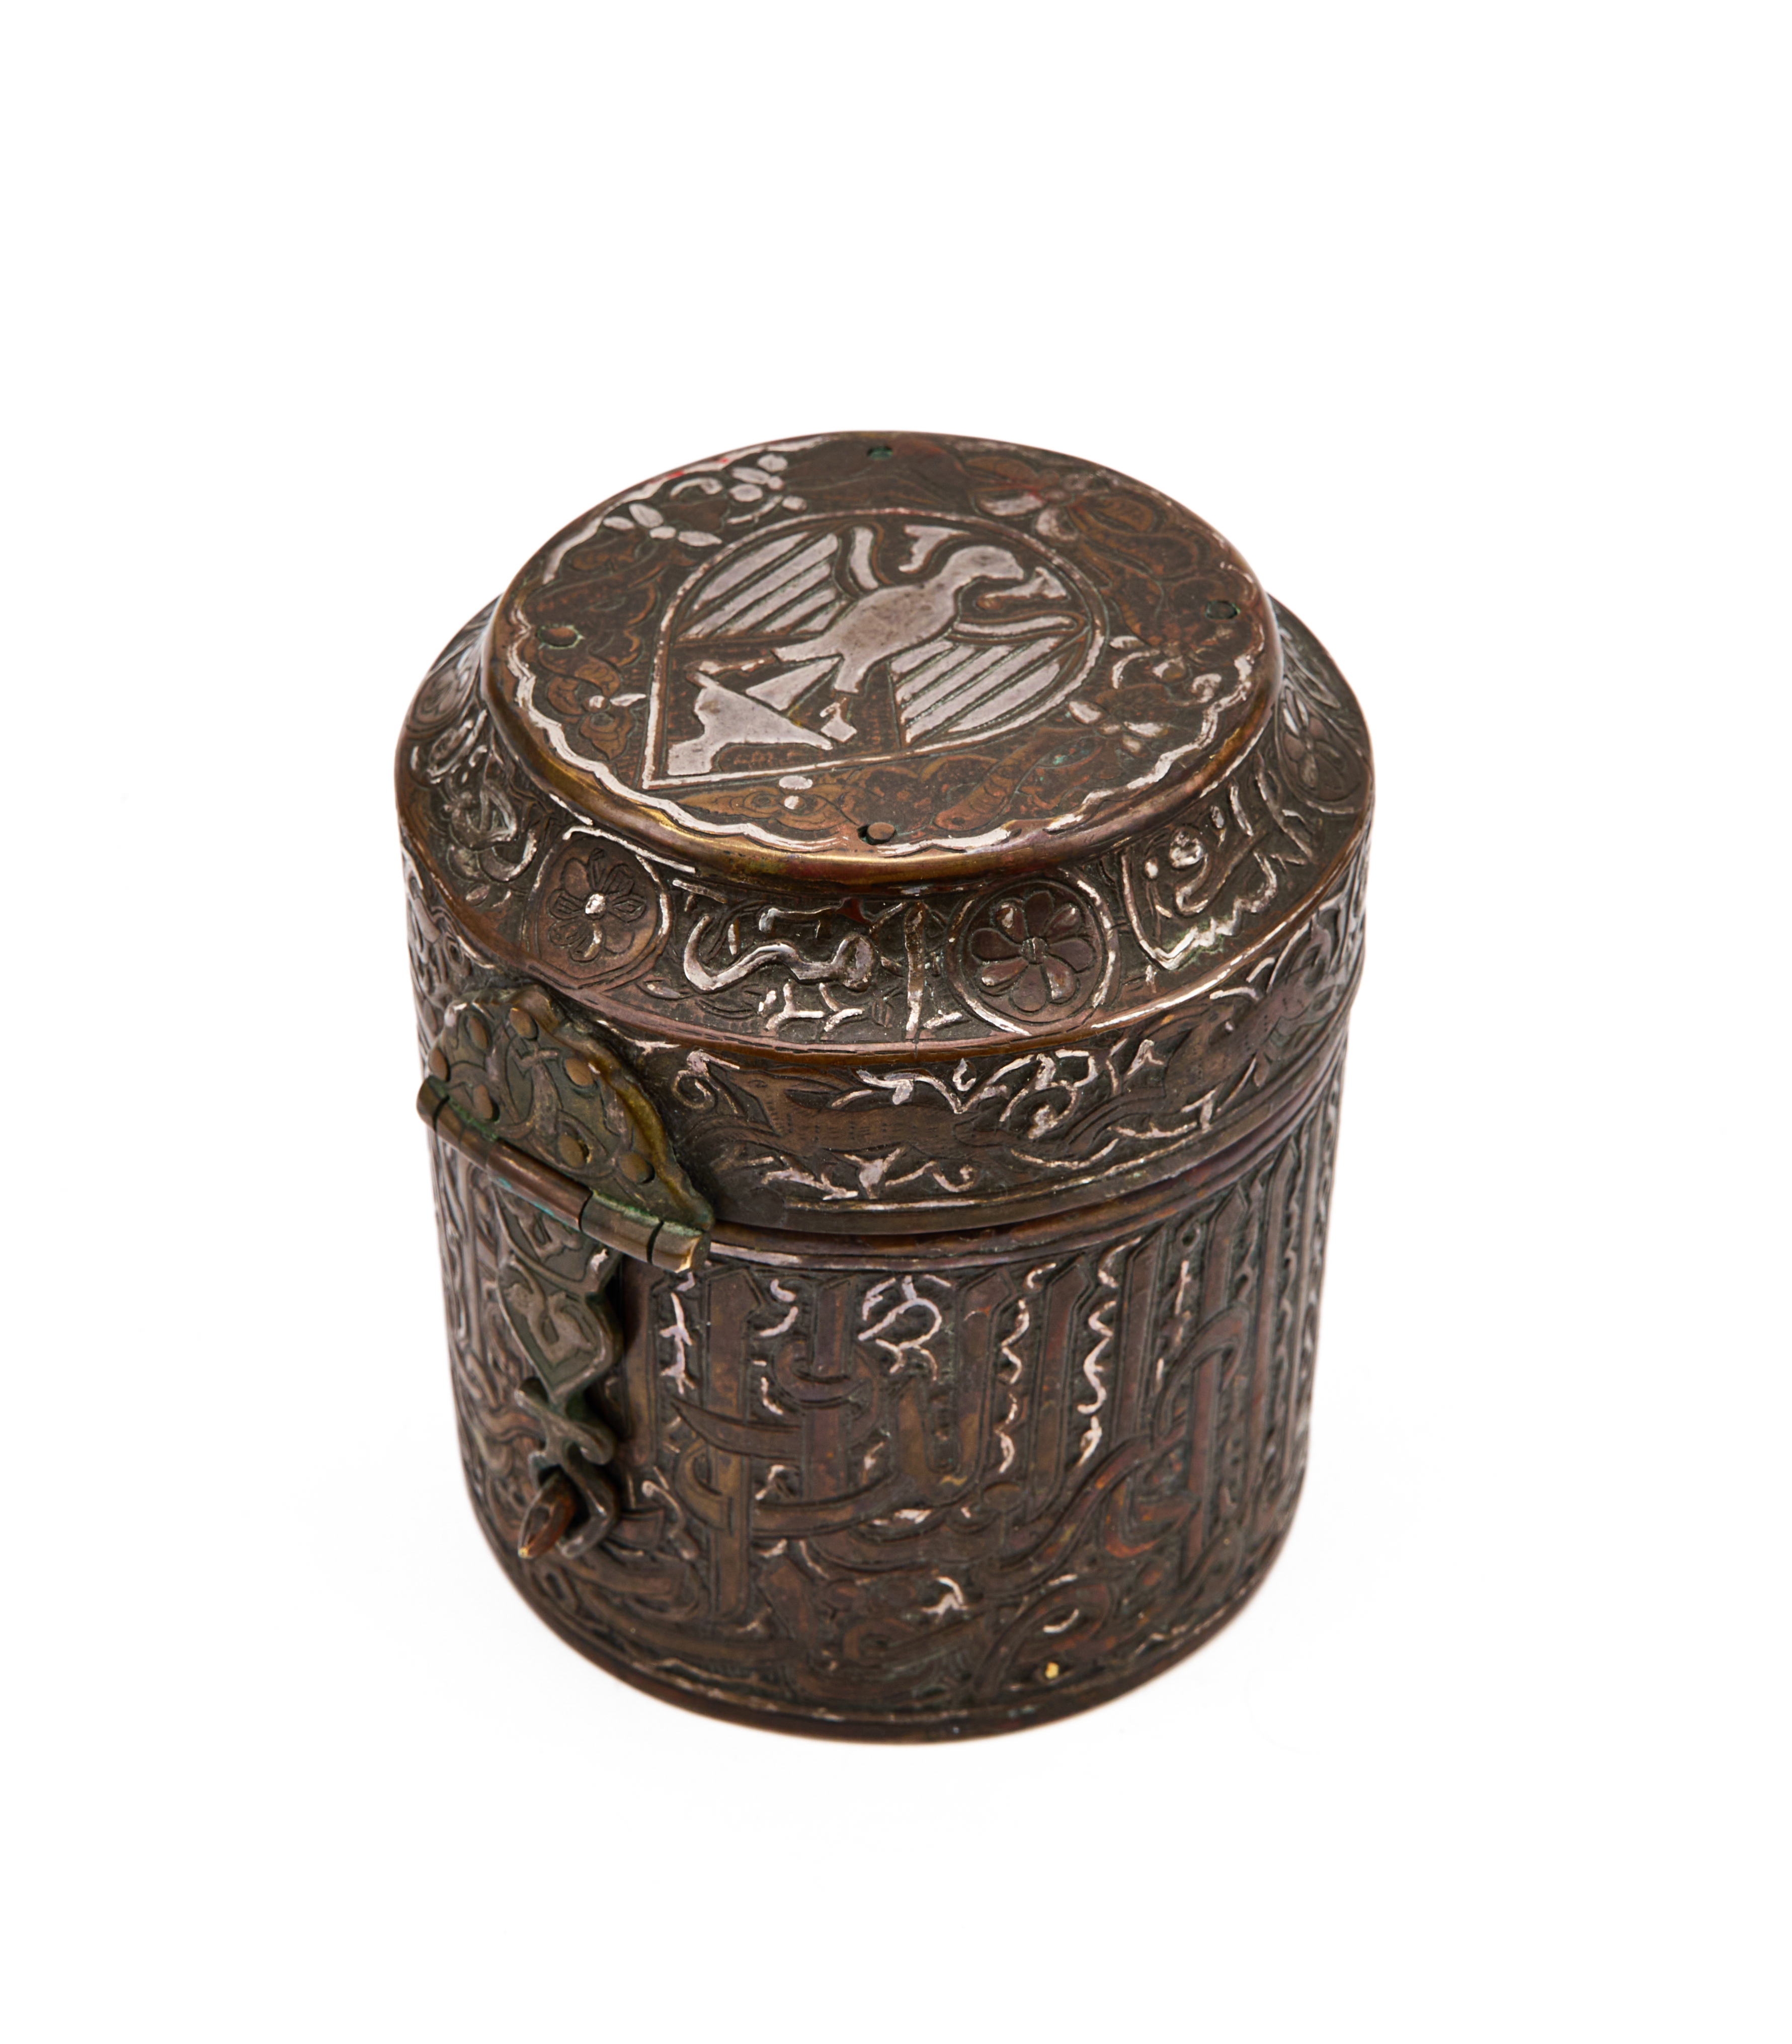 A SILVER INLAID SELJUK BRONZE INKWELL PENDANT, PERSIA, 12TH CENTURY - Image 6 of 8